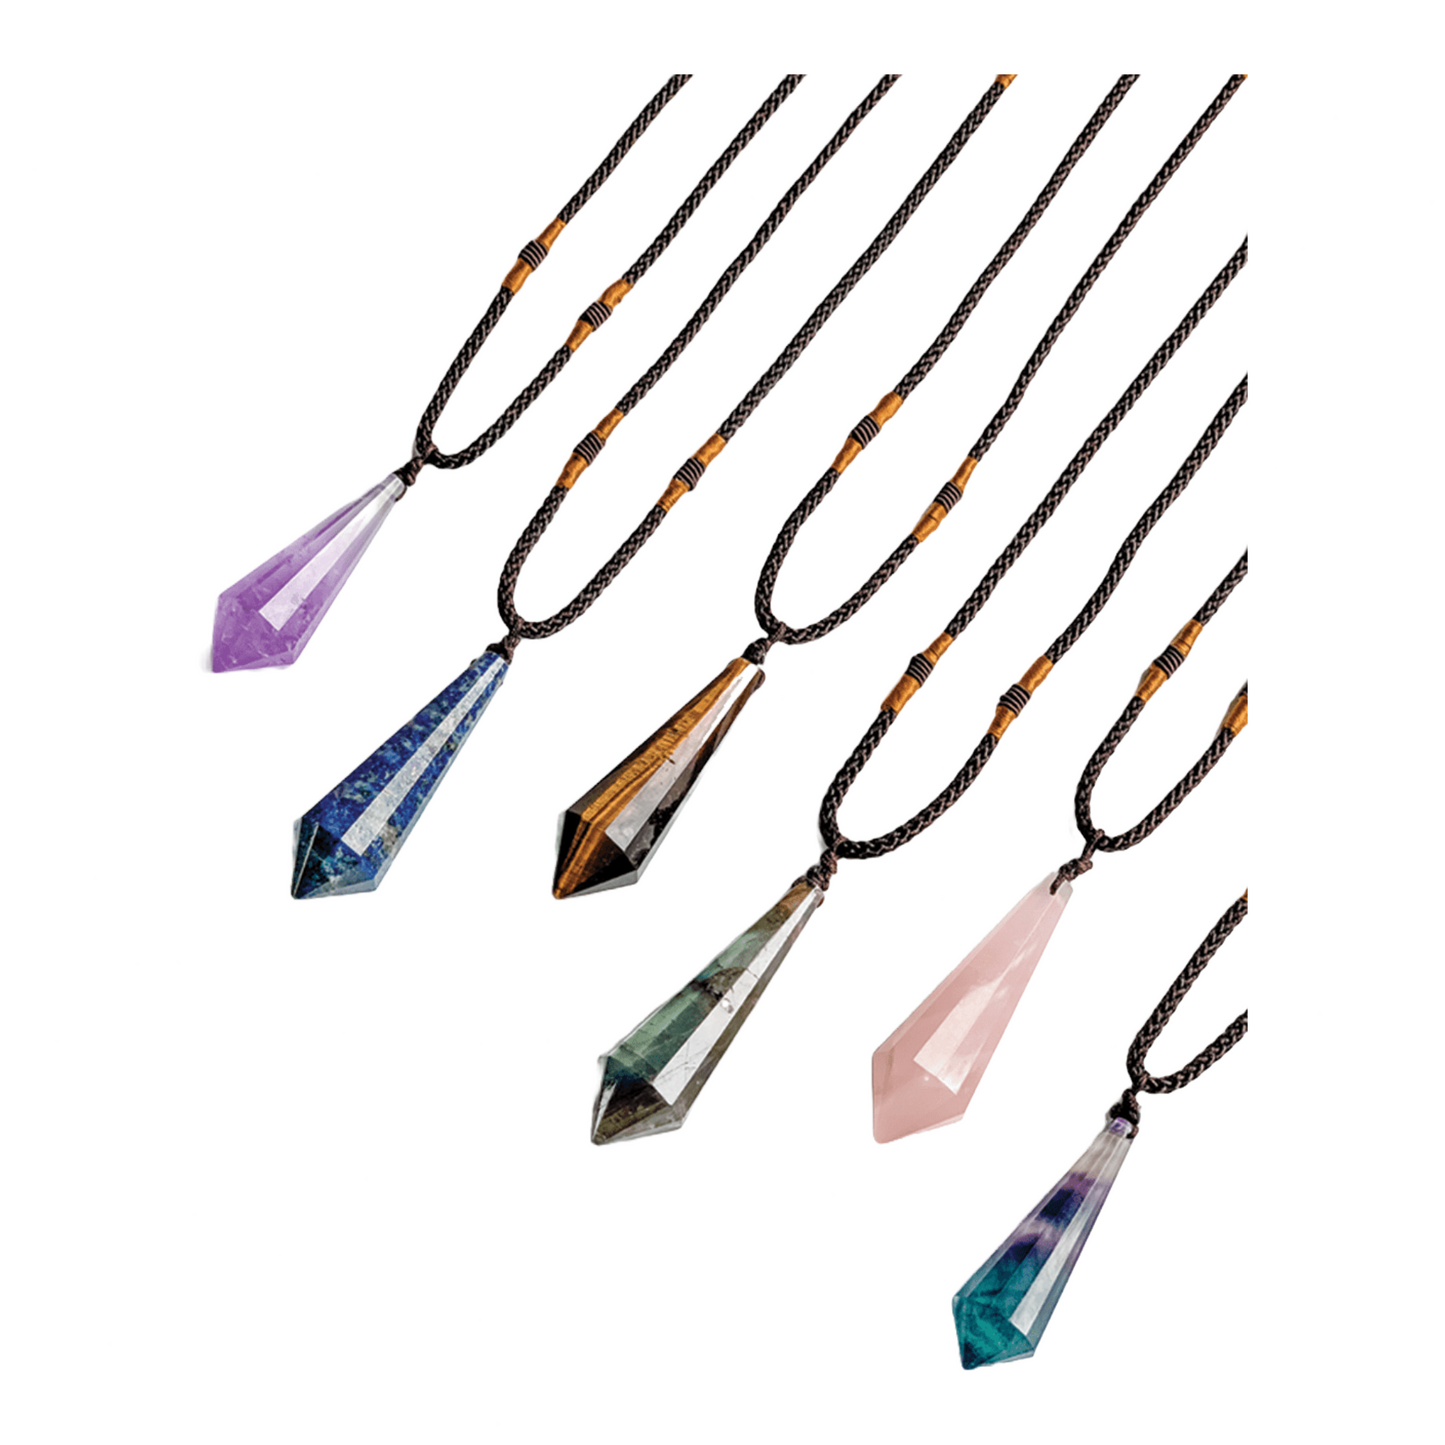 Crystal Pendant Necklaces